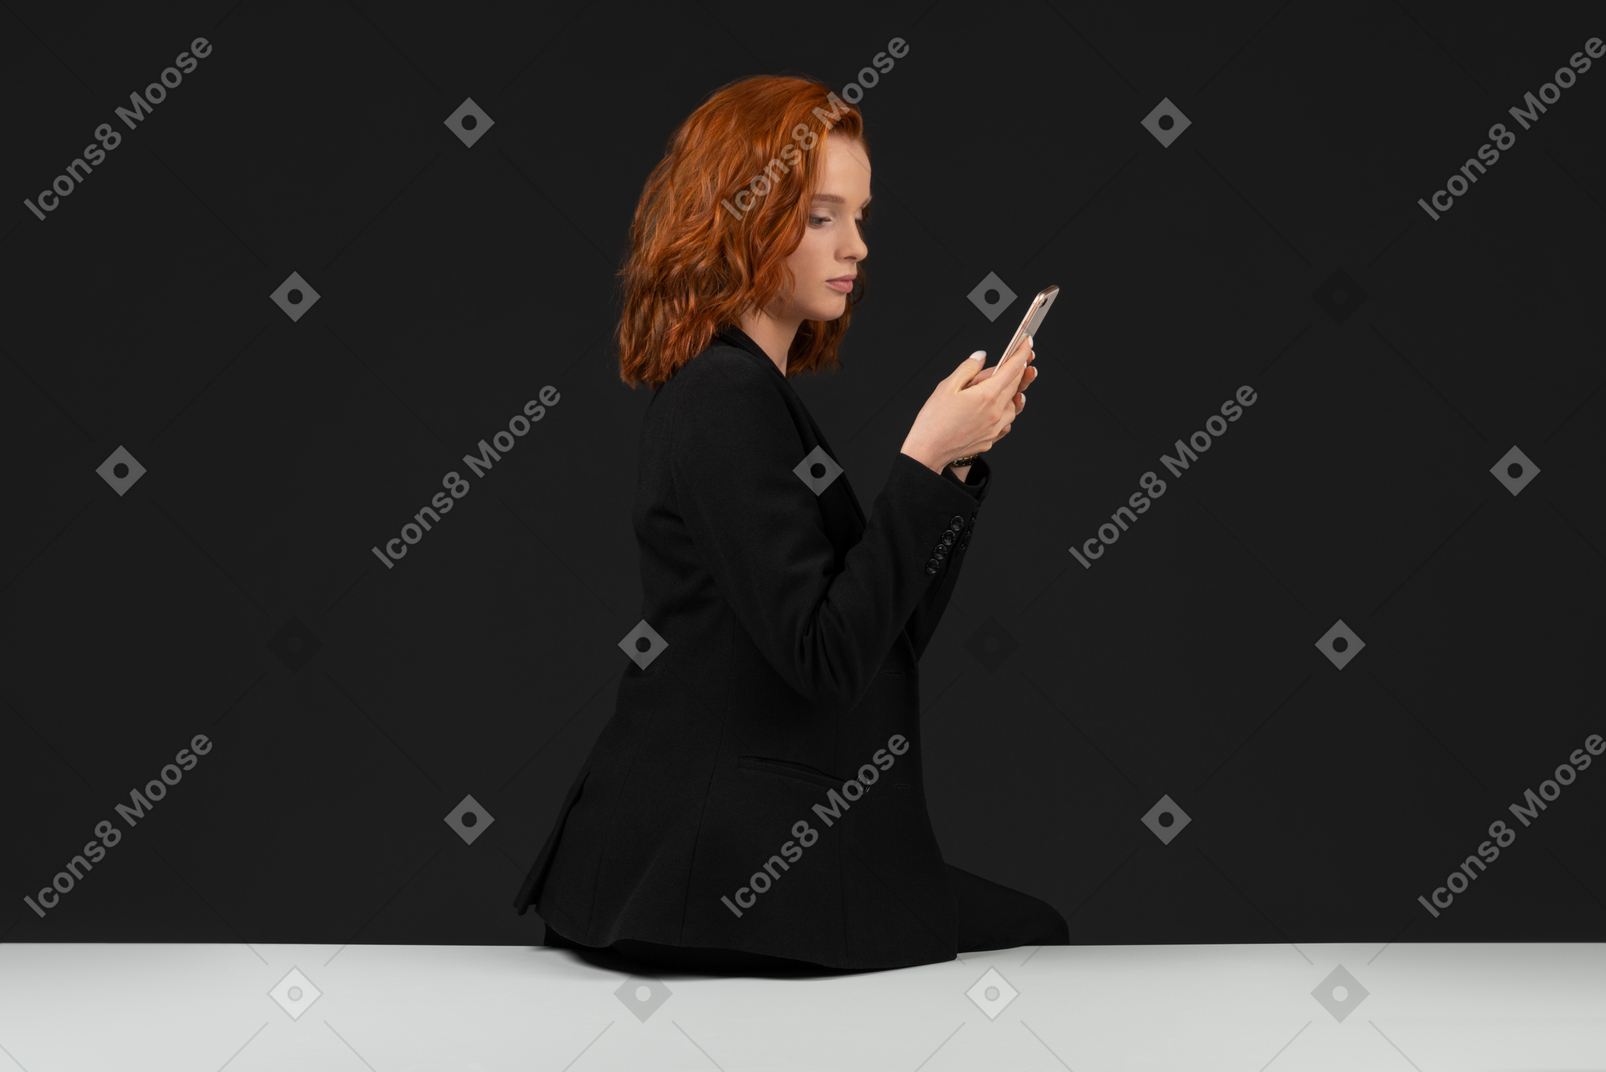 A side view of the cute girl sitting on the table and holding the phone